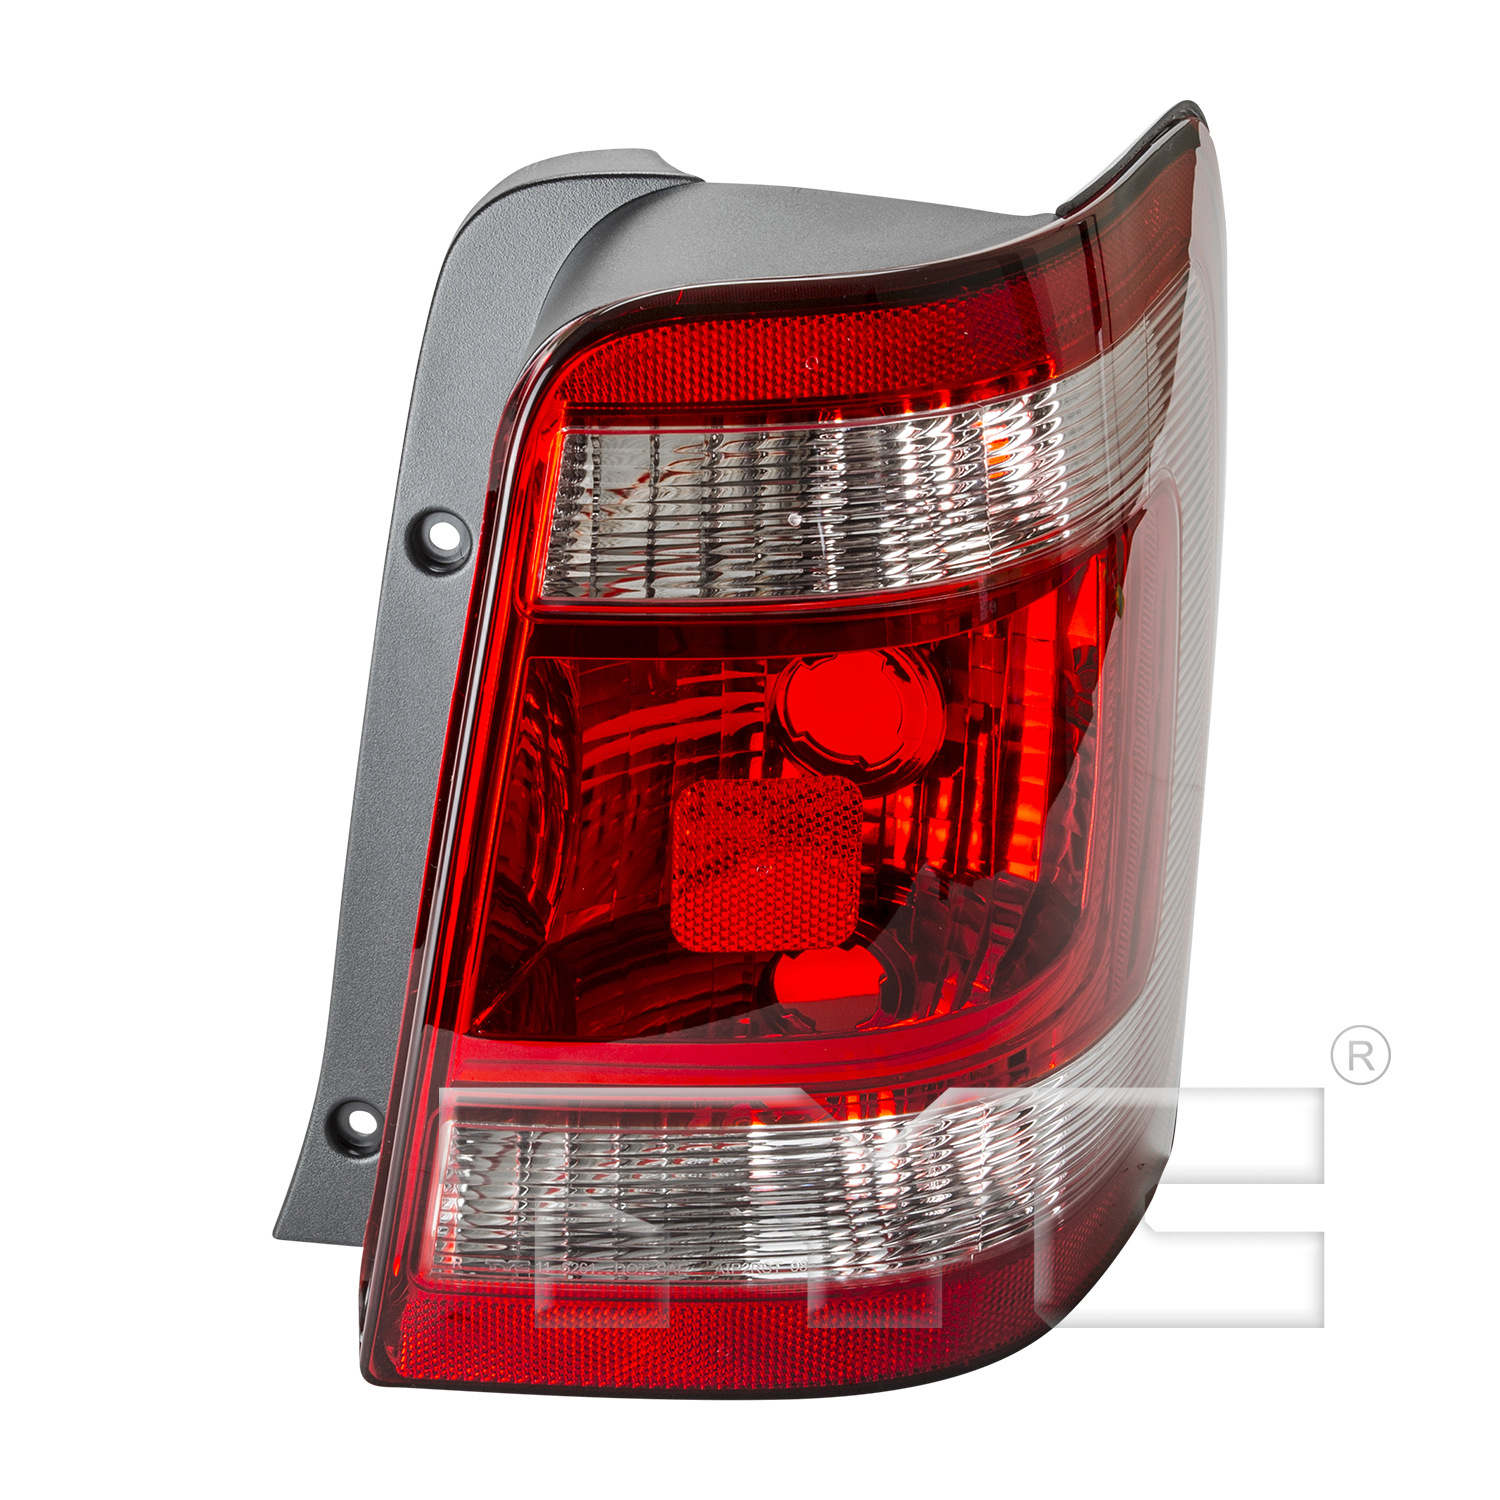 Aftermarket TAILLIGHTS for FORD - ESCAPE, ESCAPE,08-12,RT Taillamp assy